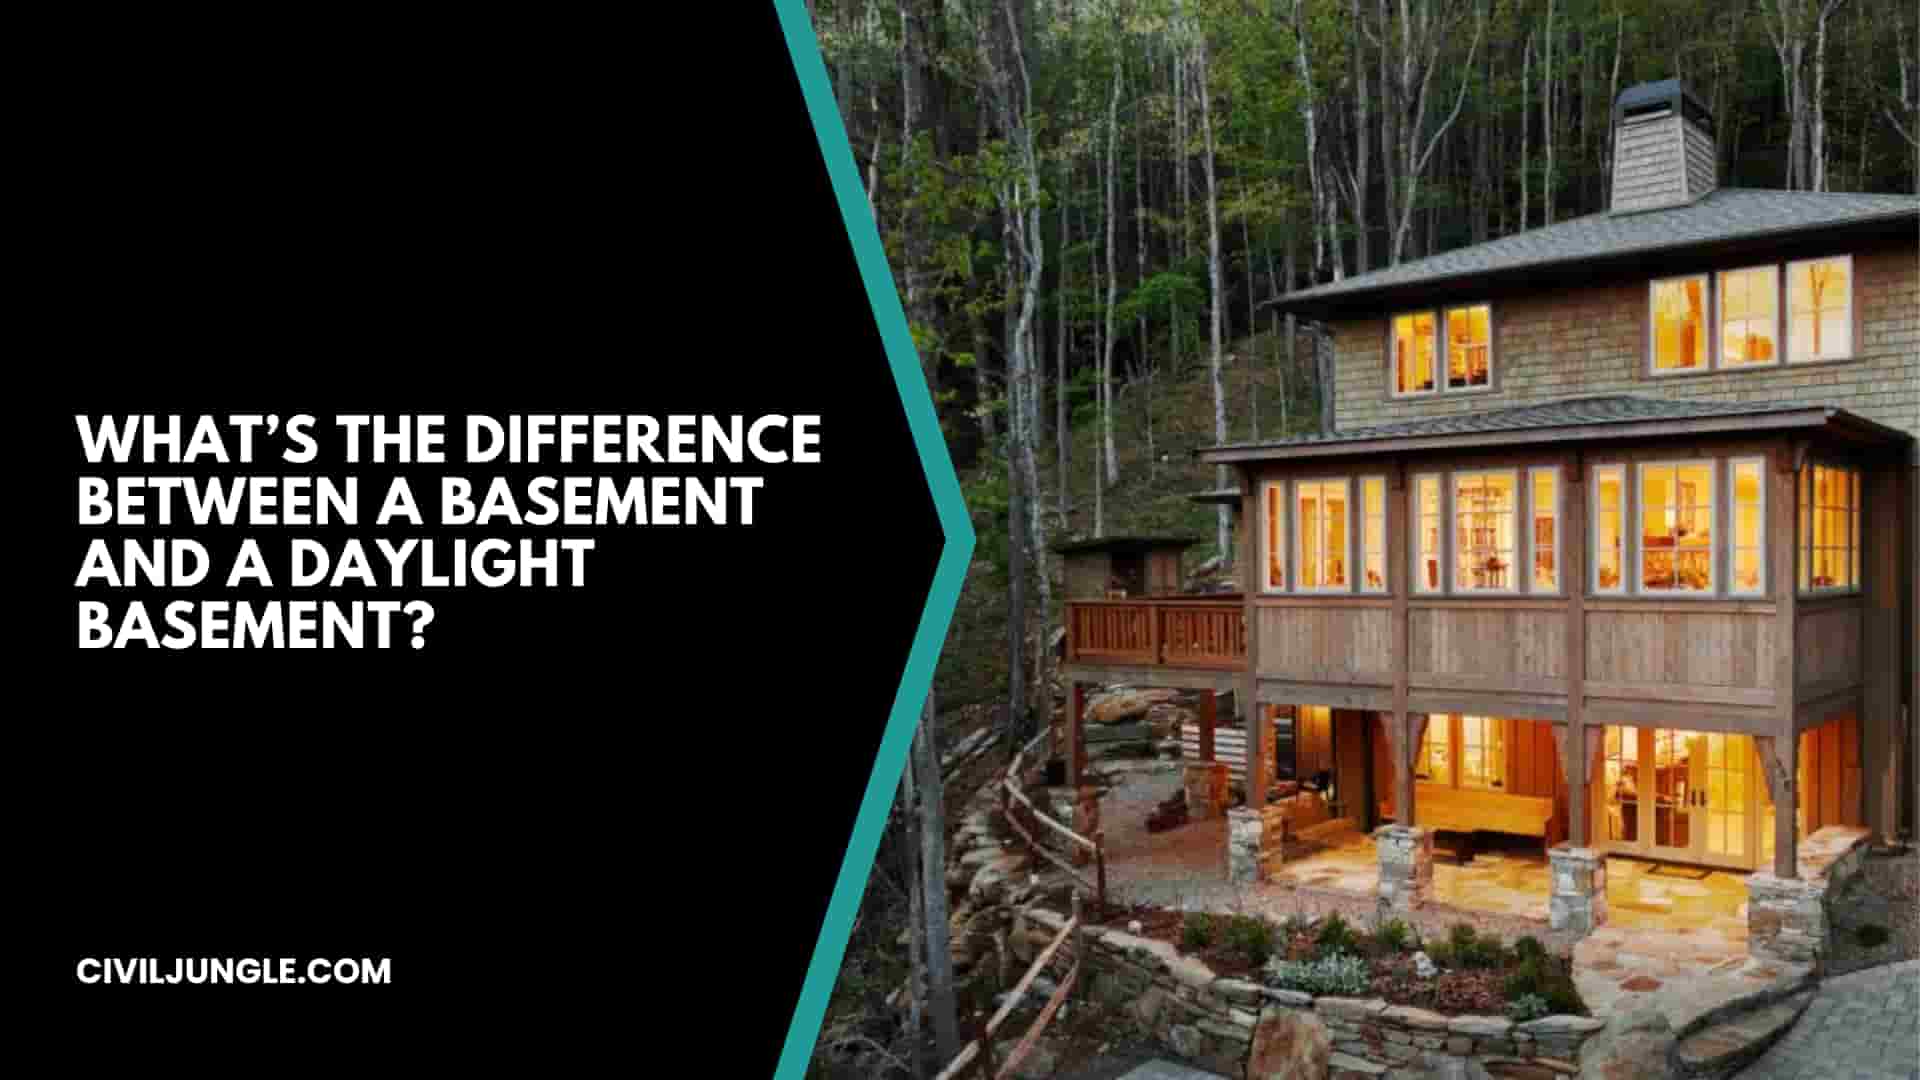 What’s the Difference Between a Basement and a Daylight Basement?